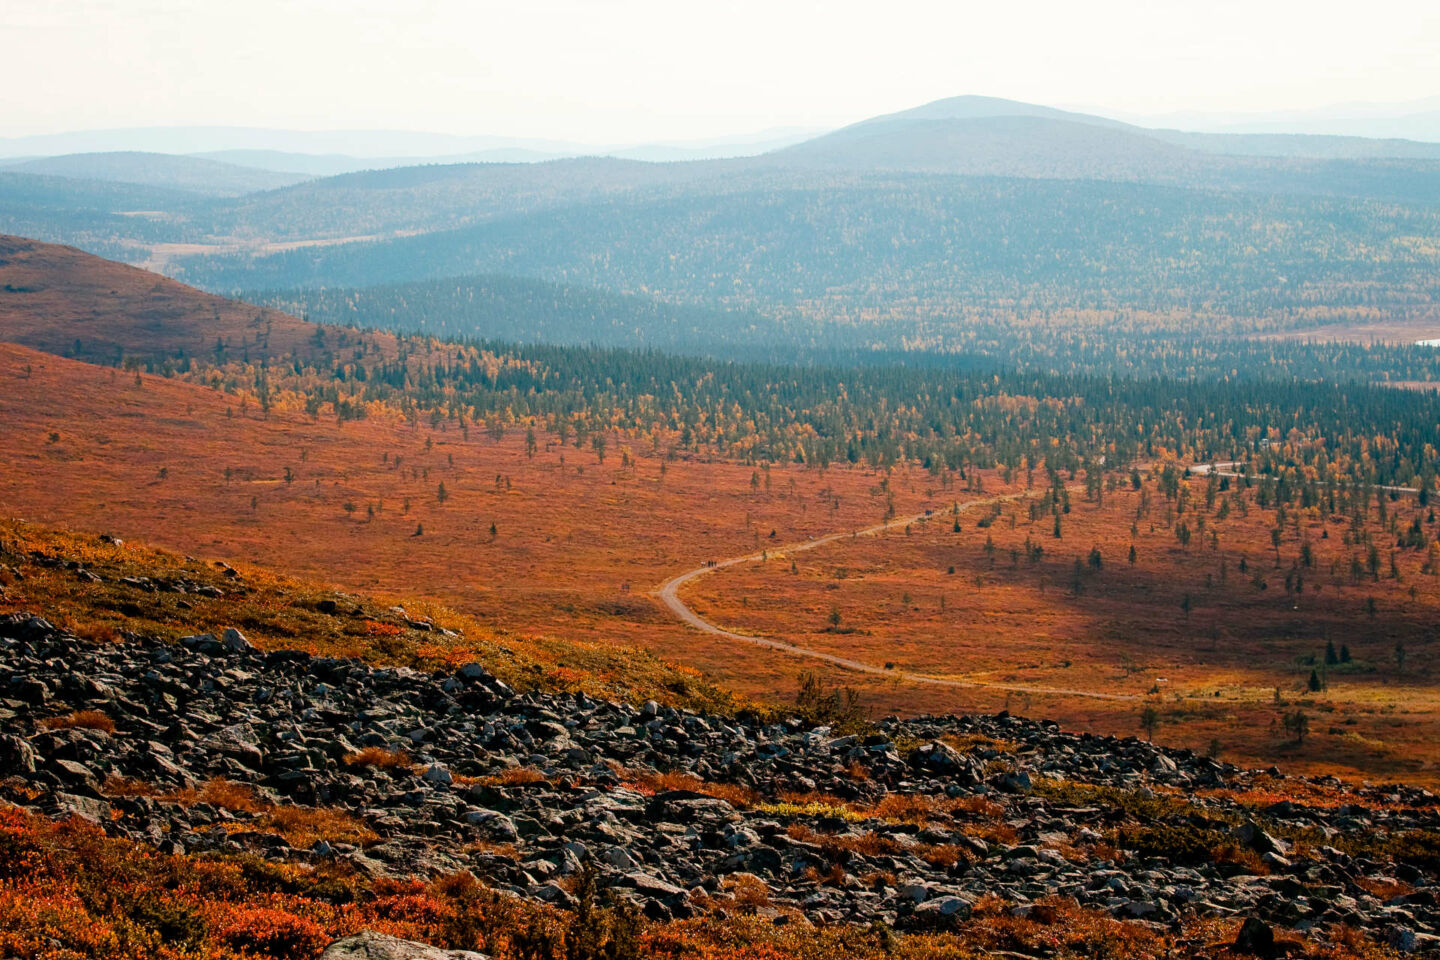 Everyman's Right allows you to film on Lapland's fells without a film permit